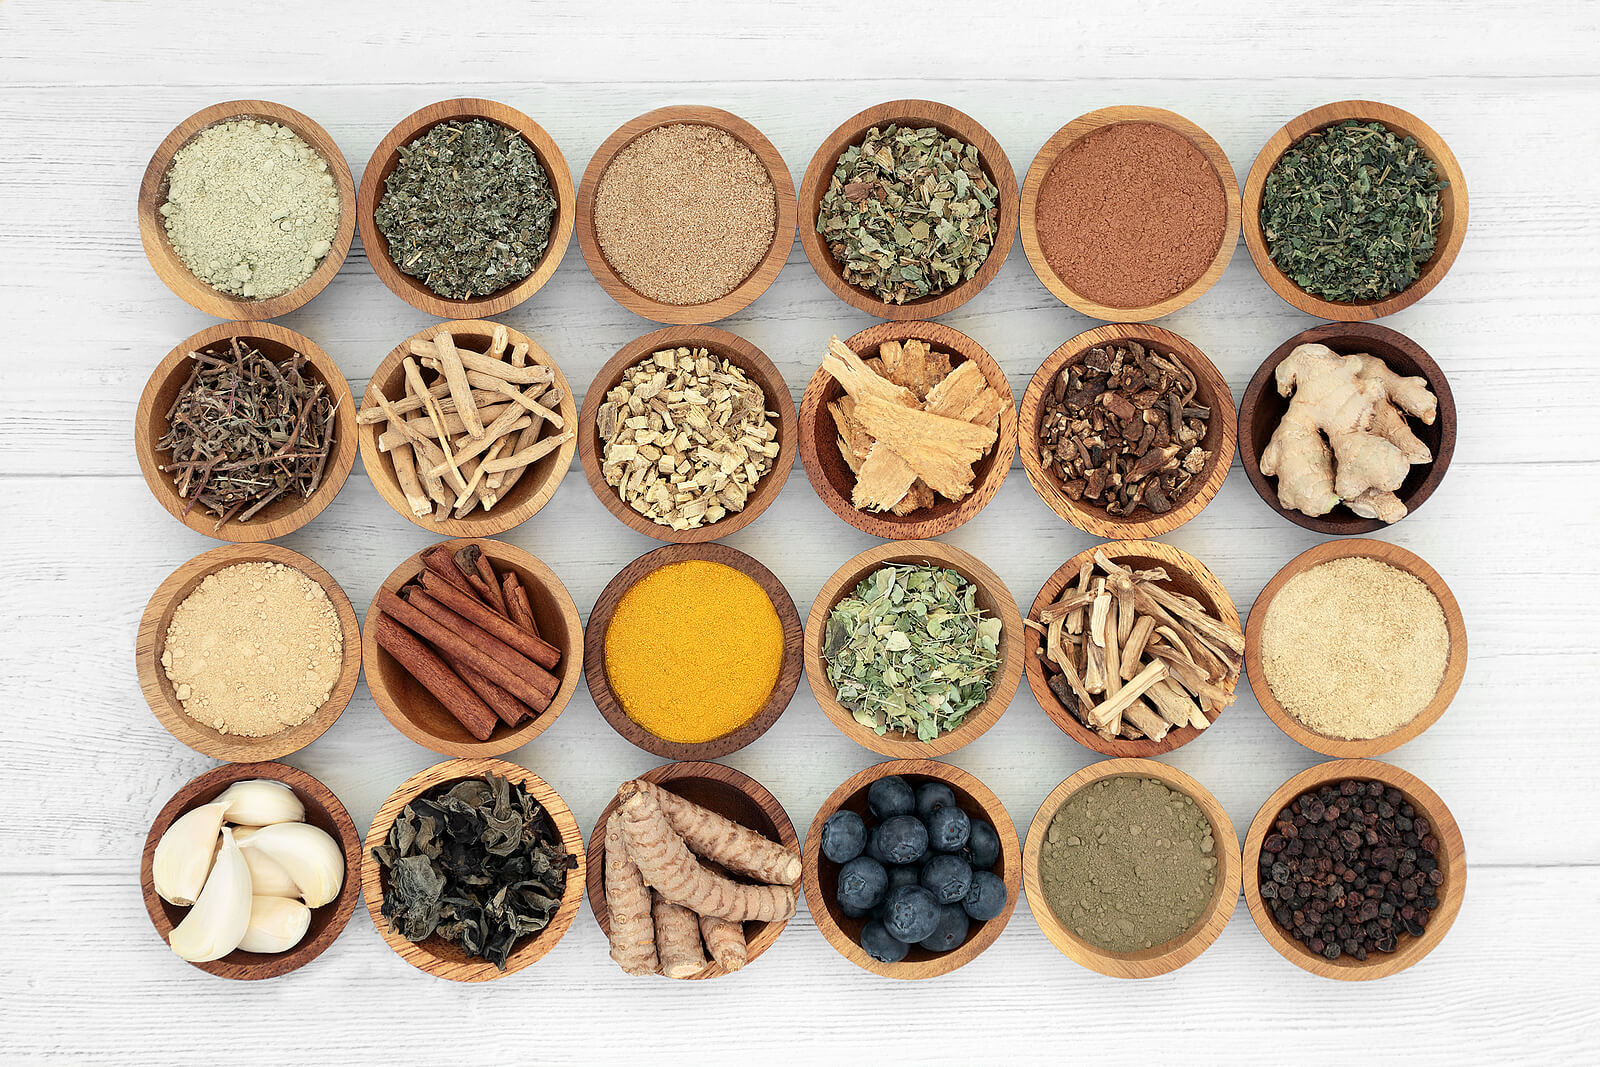 Assorted spices in bowls on wooden surface.